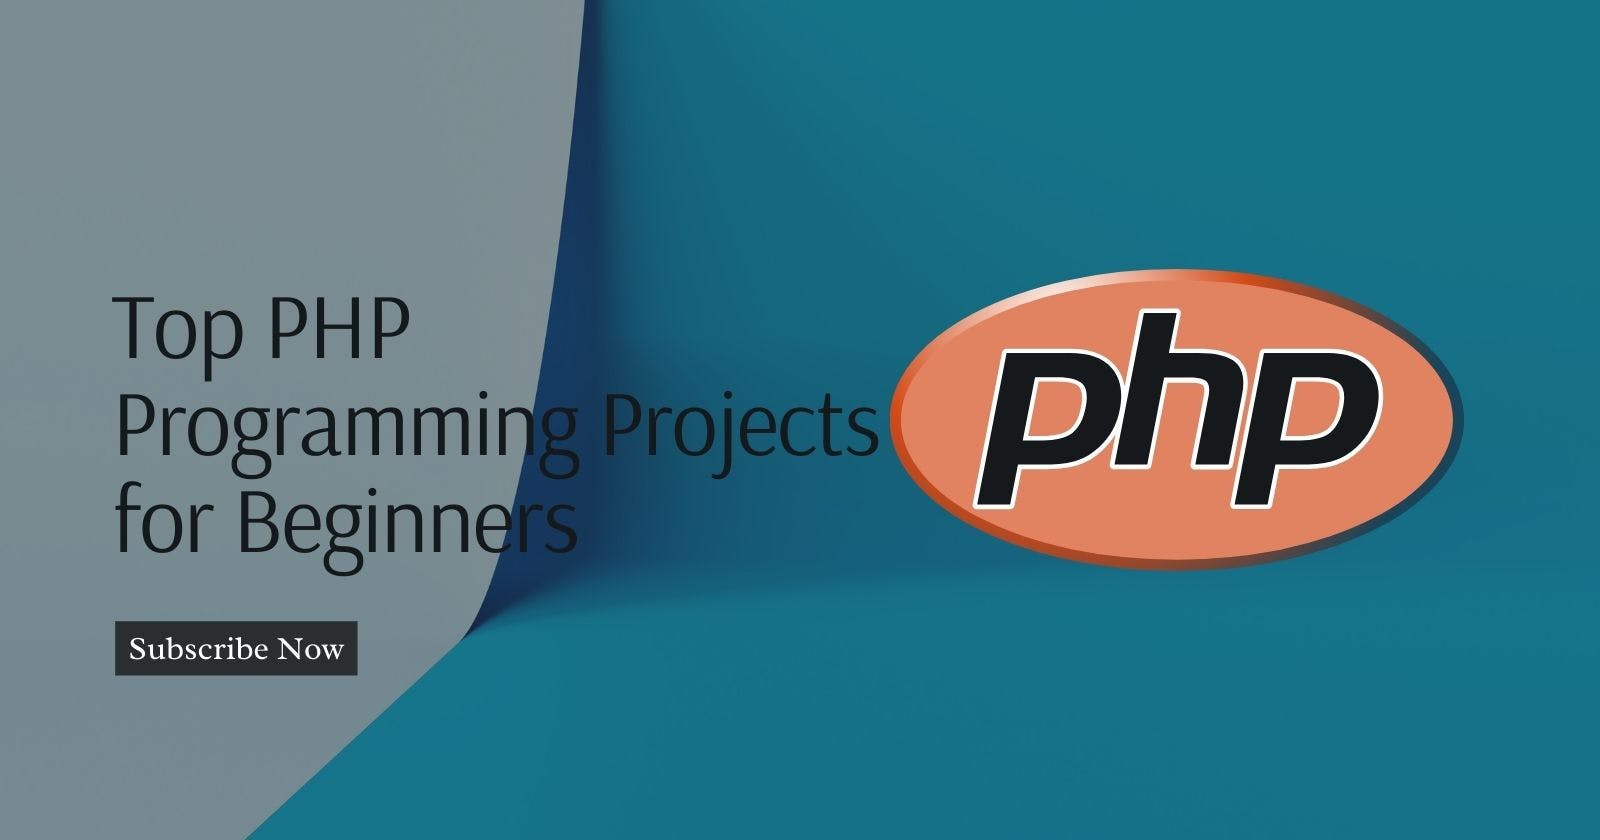 Top PHP Programming Projects for Beginners